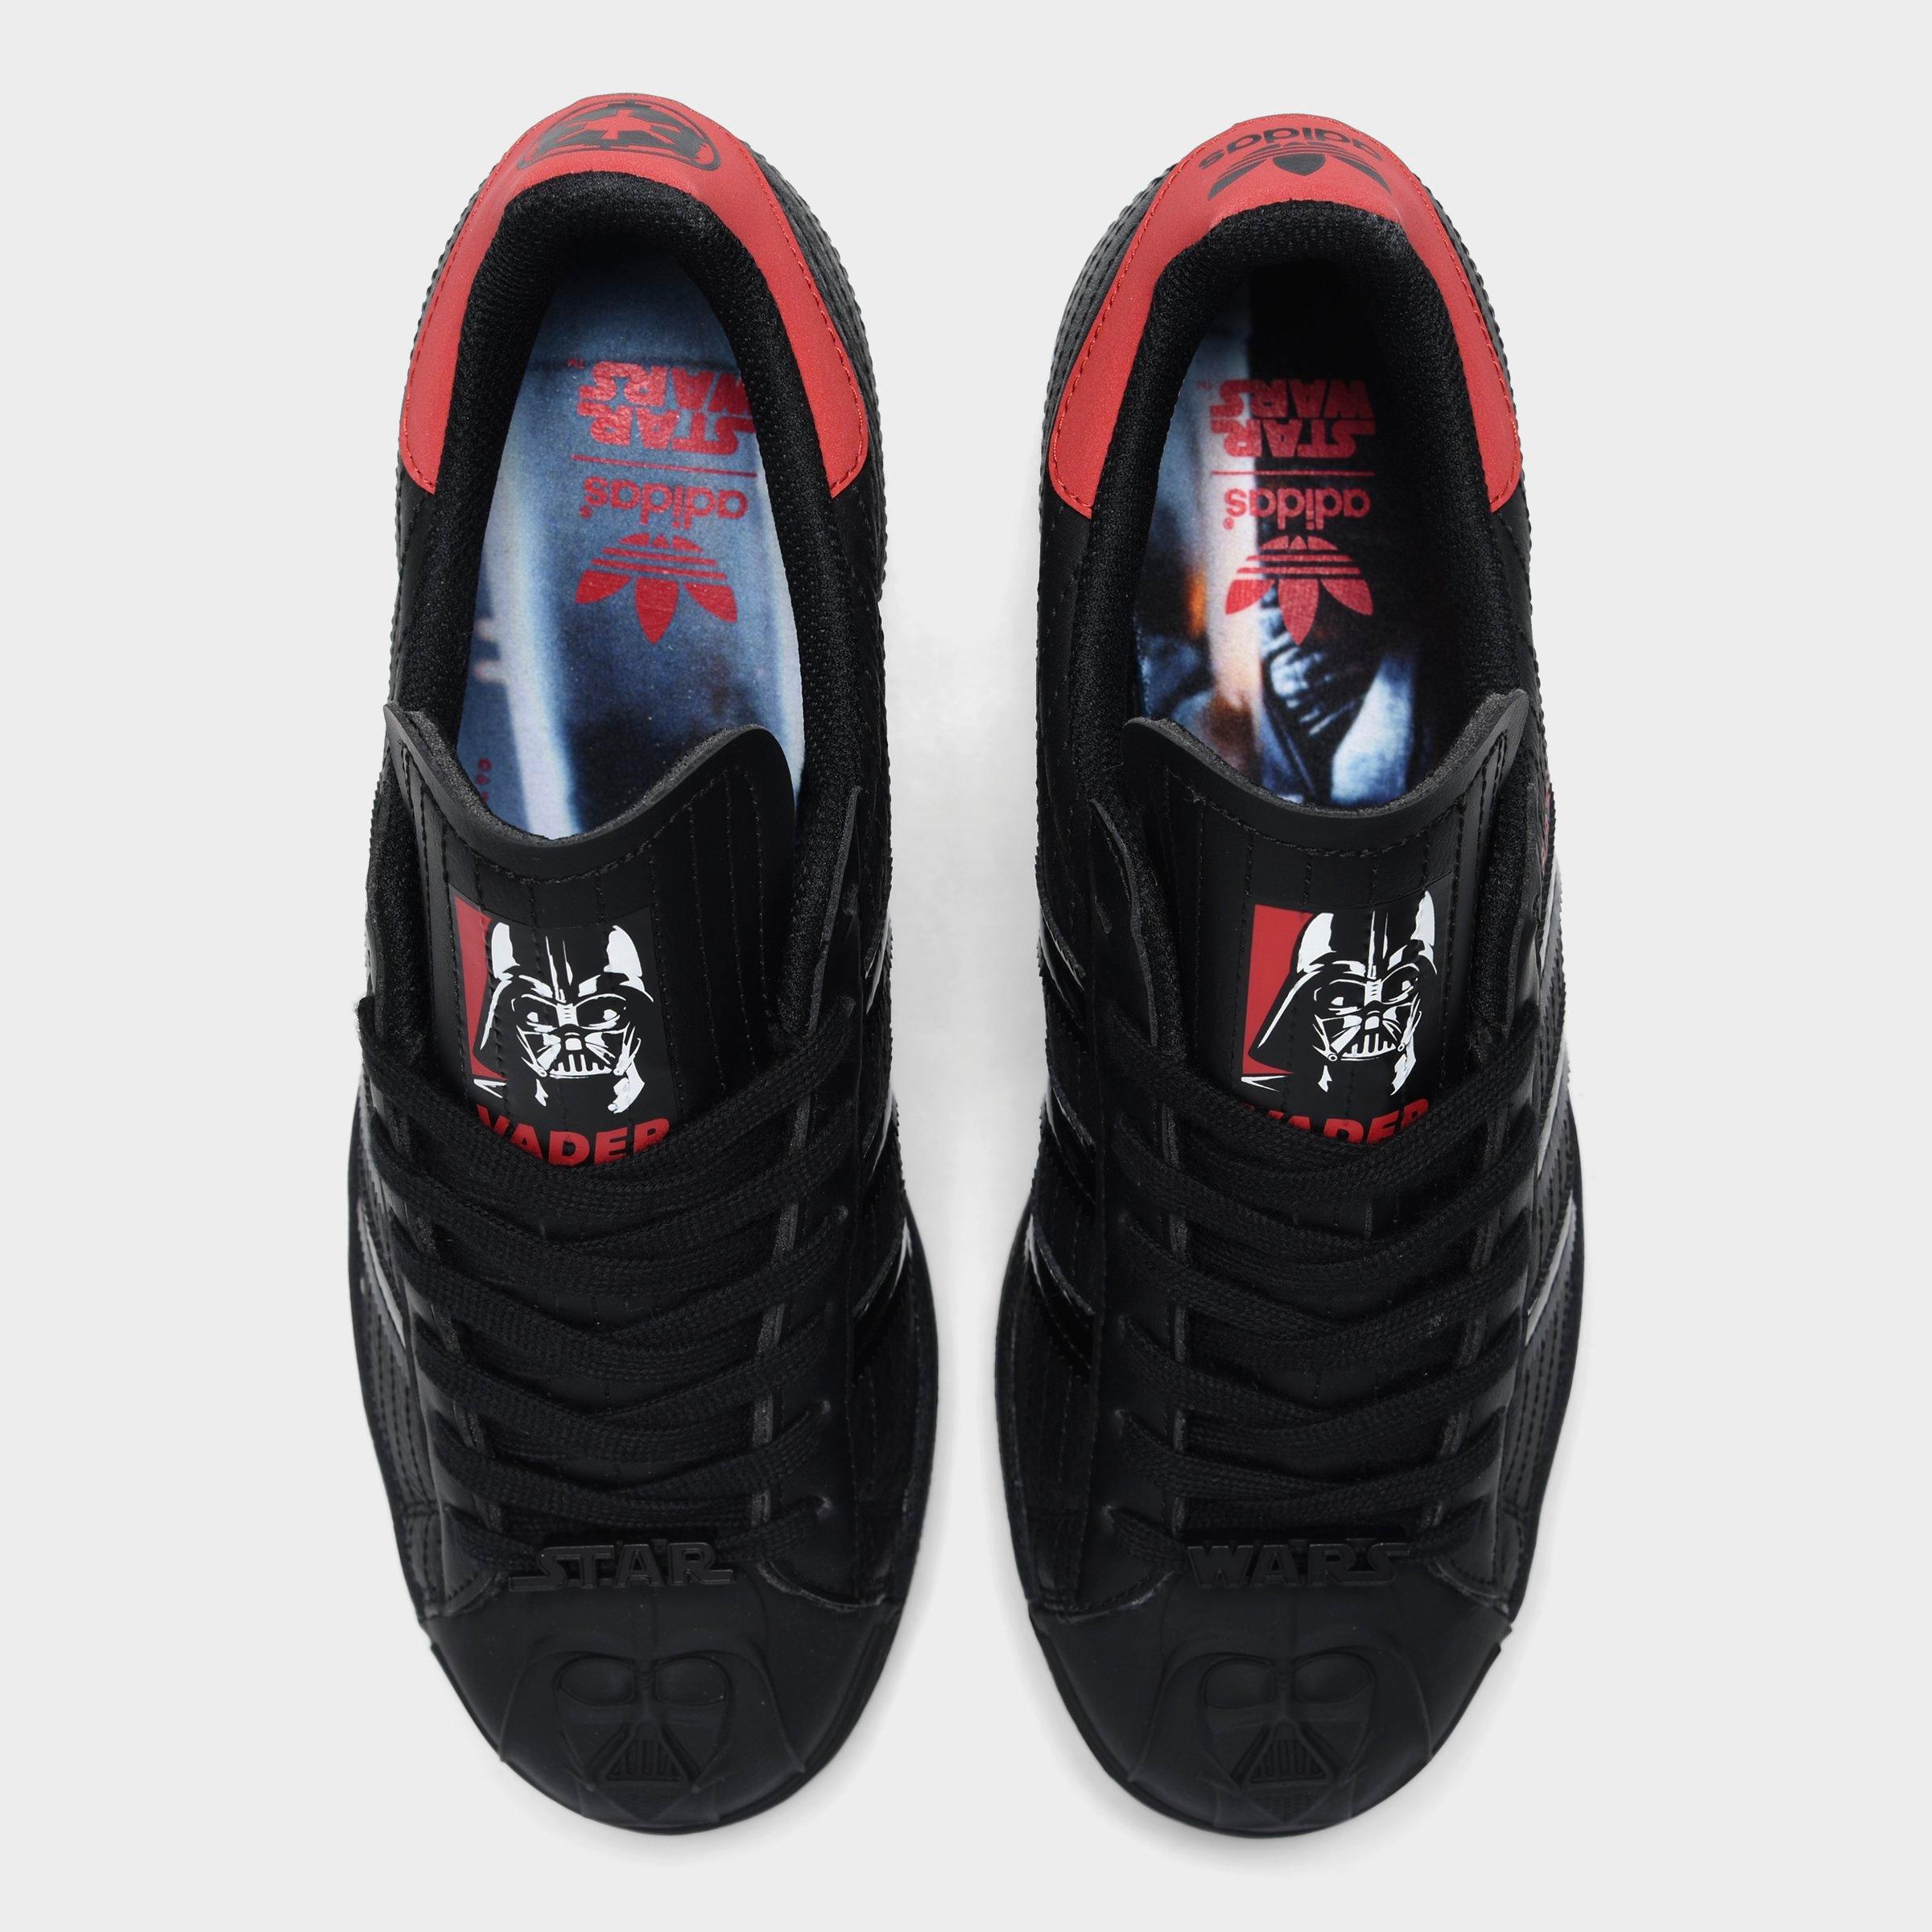 finish line star wars shoes